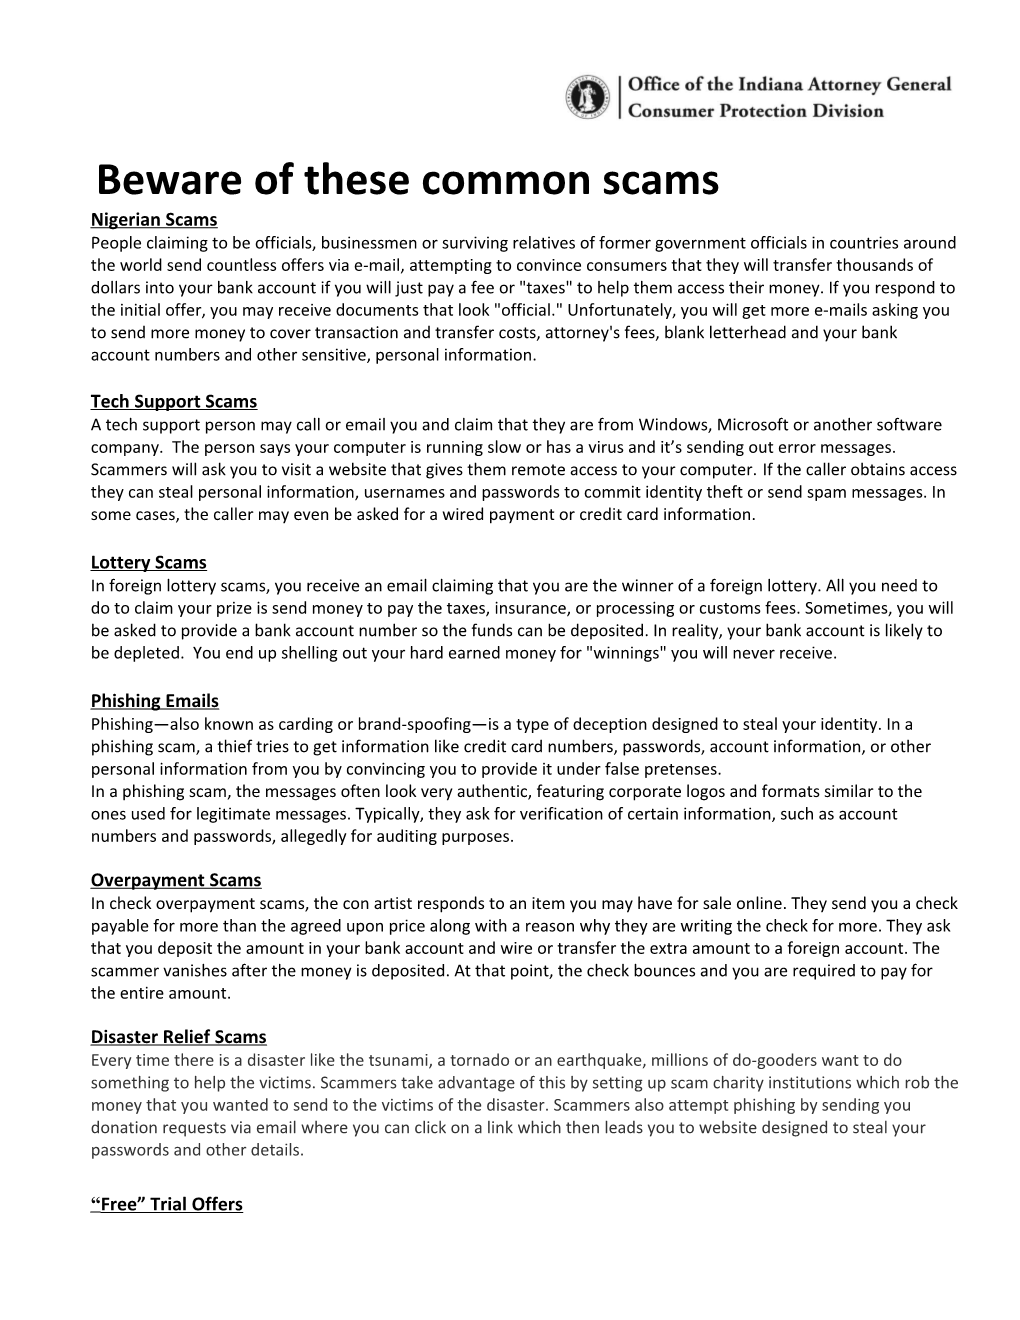 Beware of These Common Scams